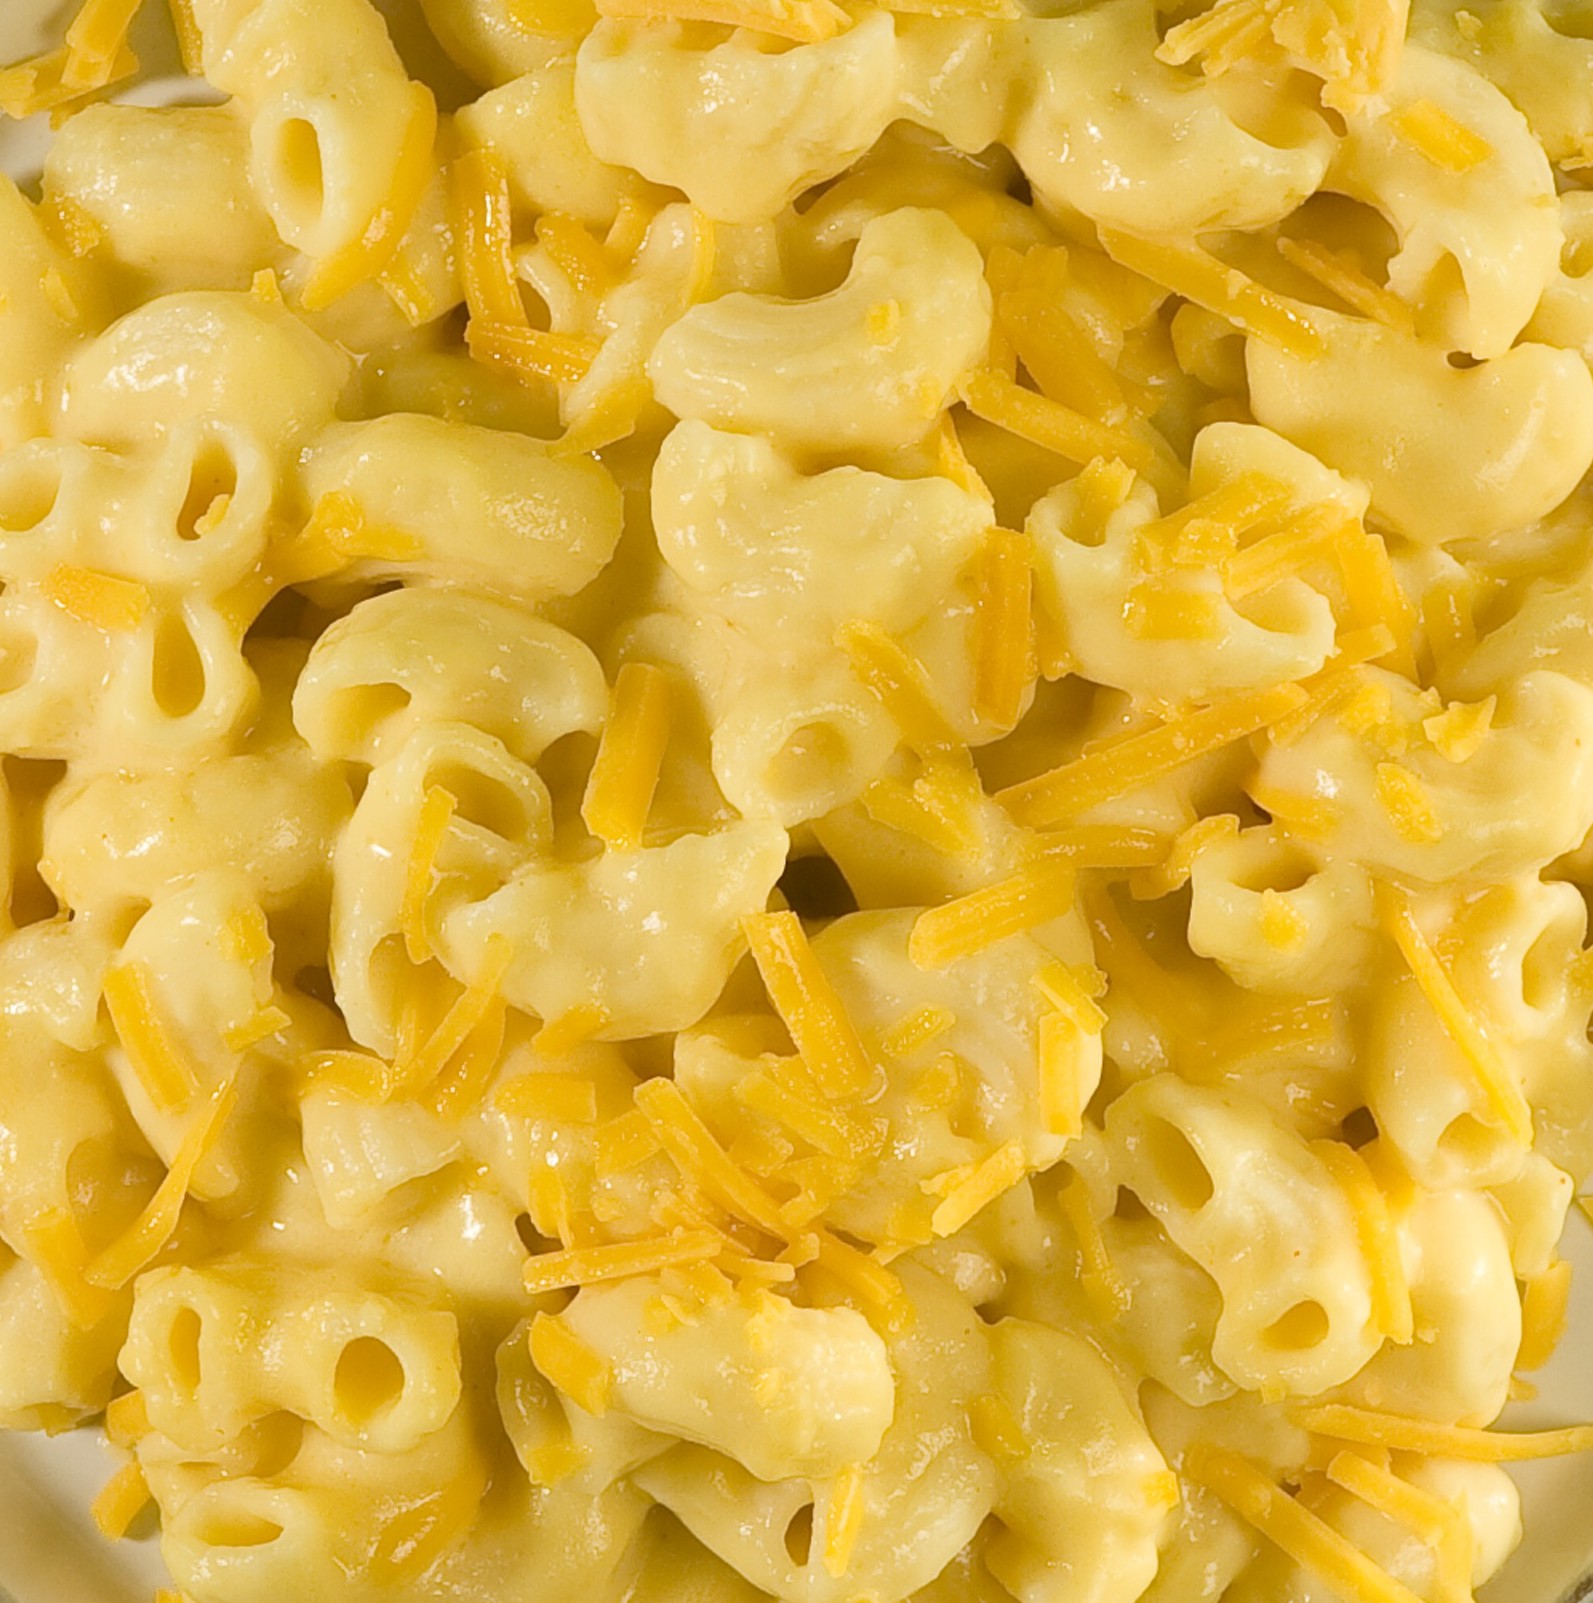 uncooked mac and cheese noodles